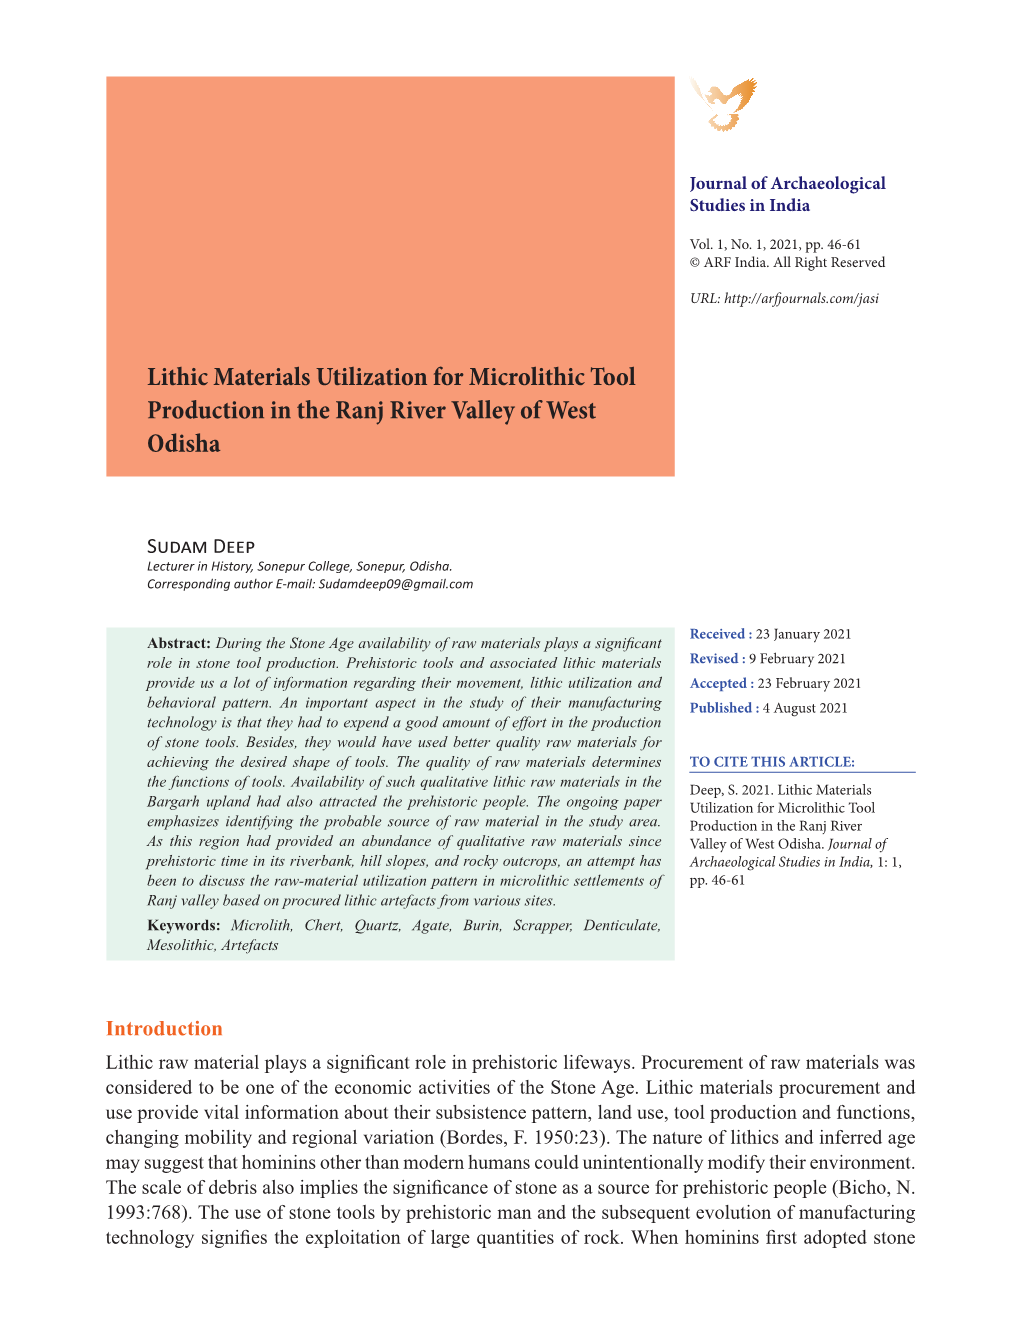 Lithic Materials Utilization for Microlithic Tool Production in the Ranj River Valley of West Odisha